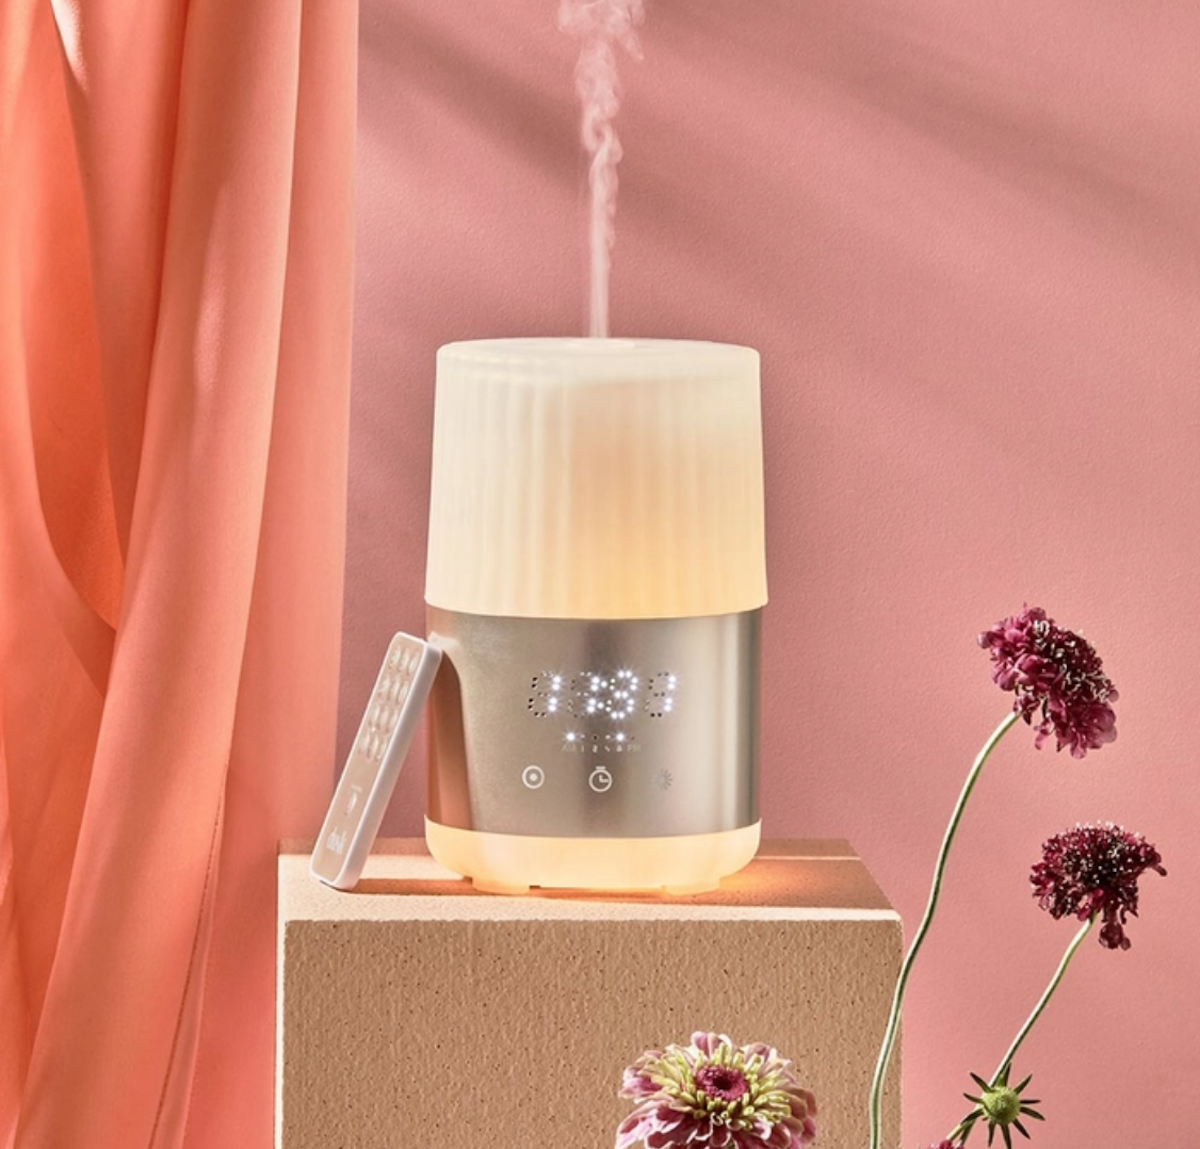 Essential Oil Diffuser Alarm Clock sitting on a bench